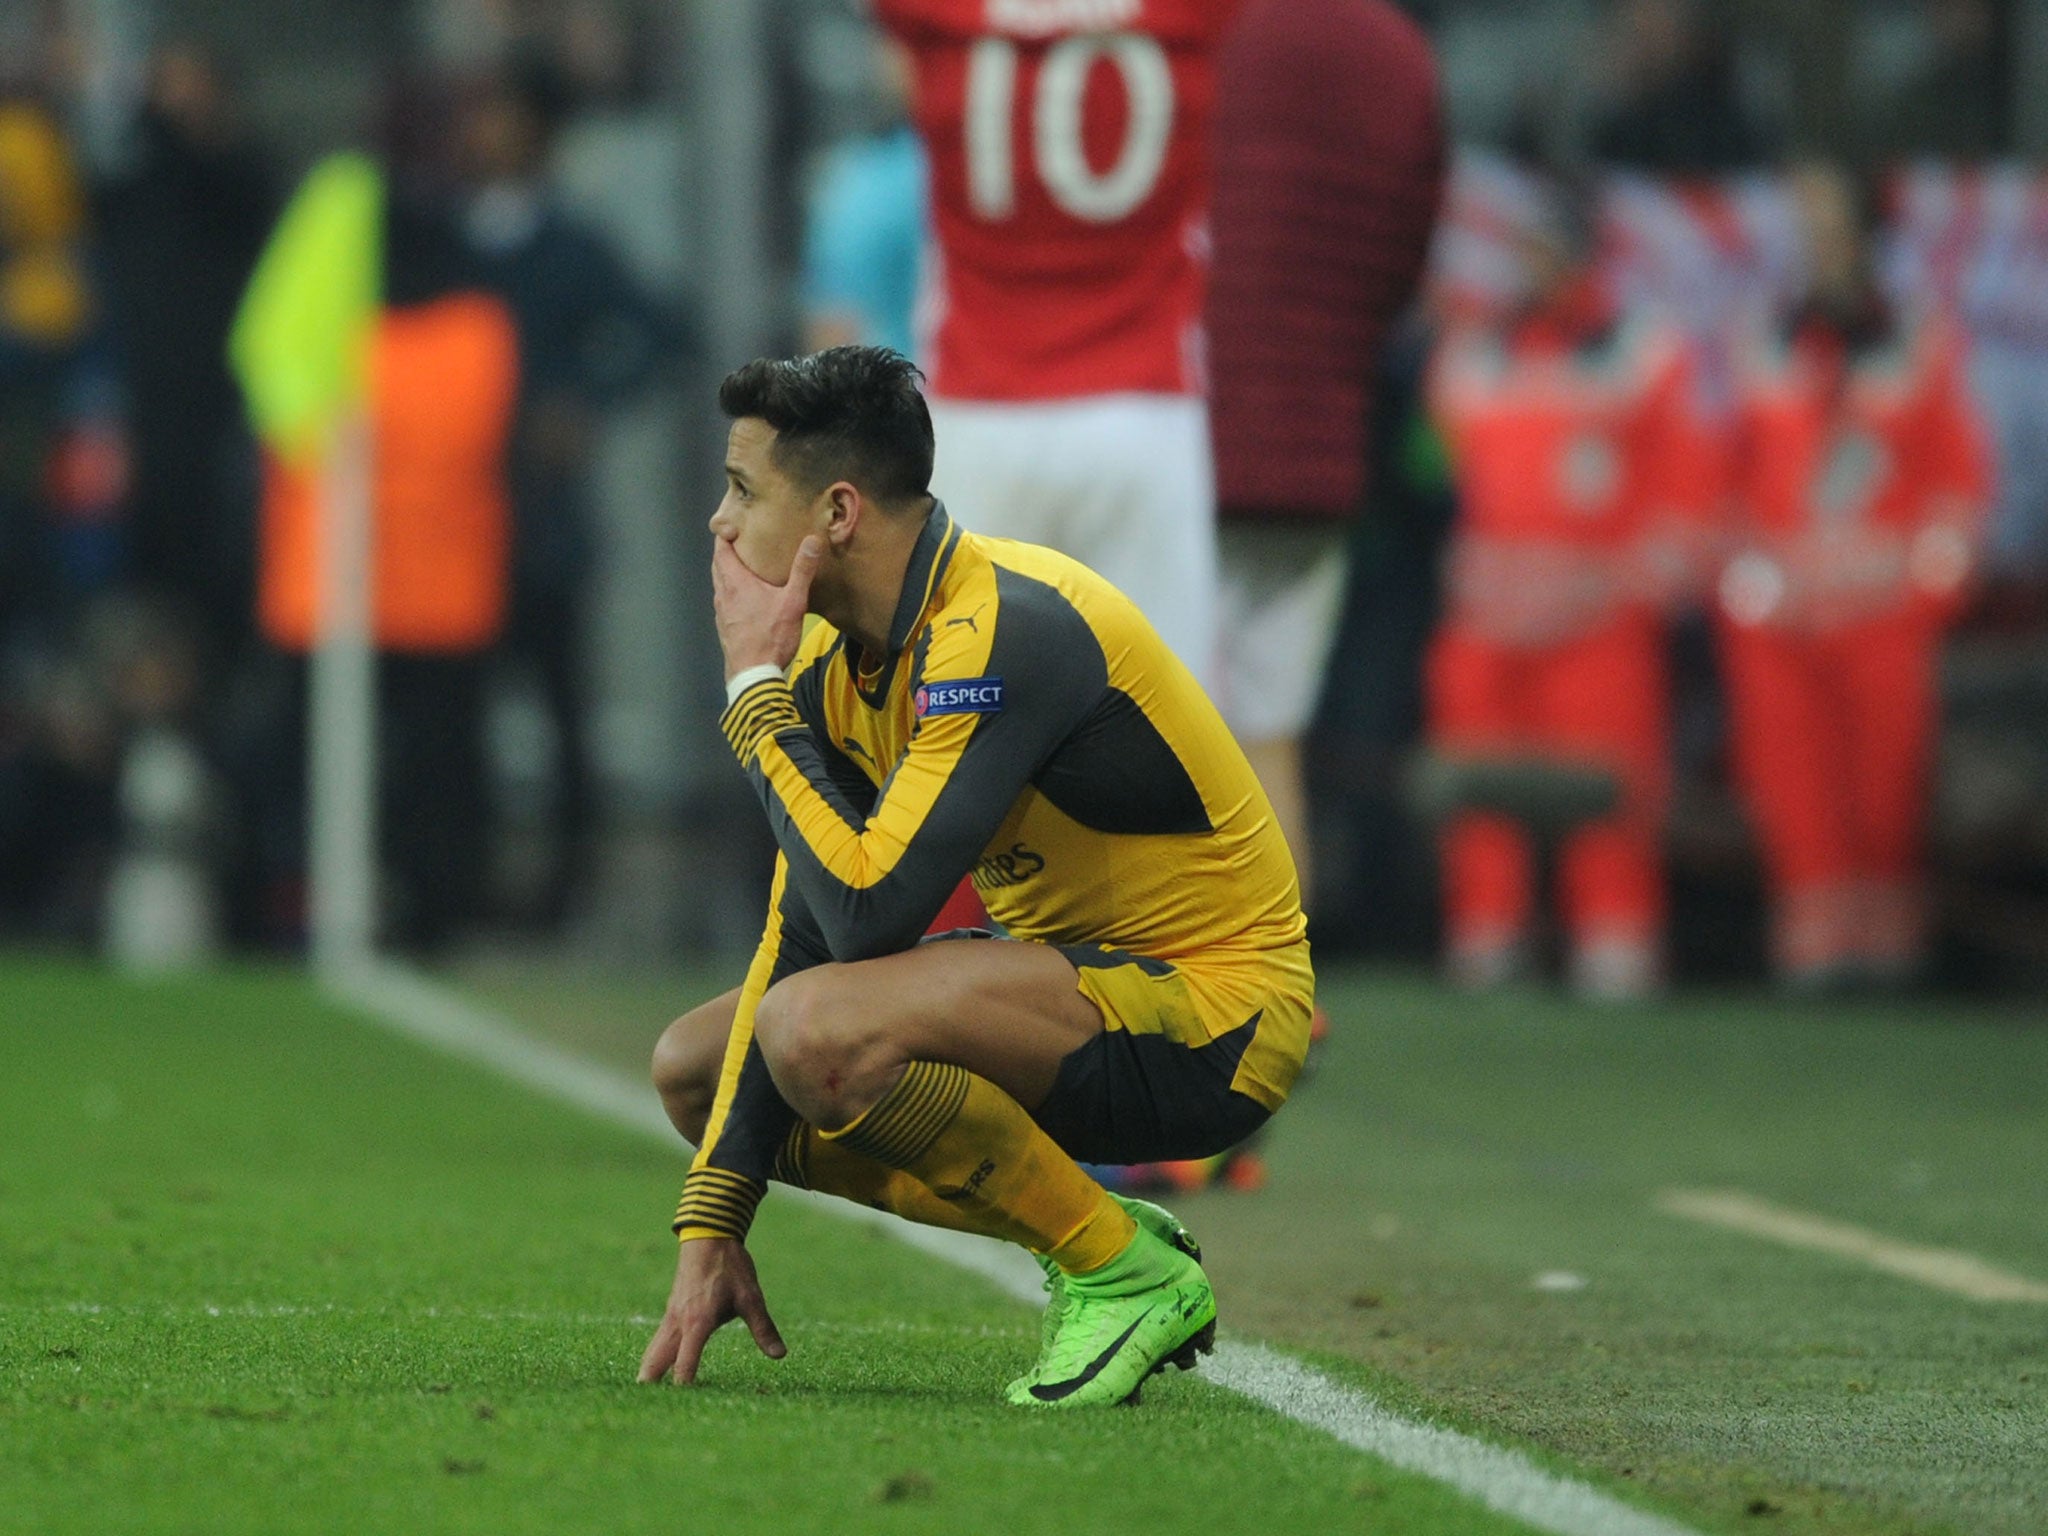 Sanchez's reaction displayed all the signs of a player considering his future